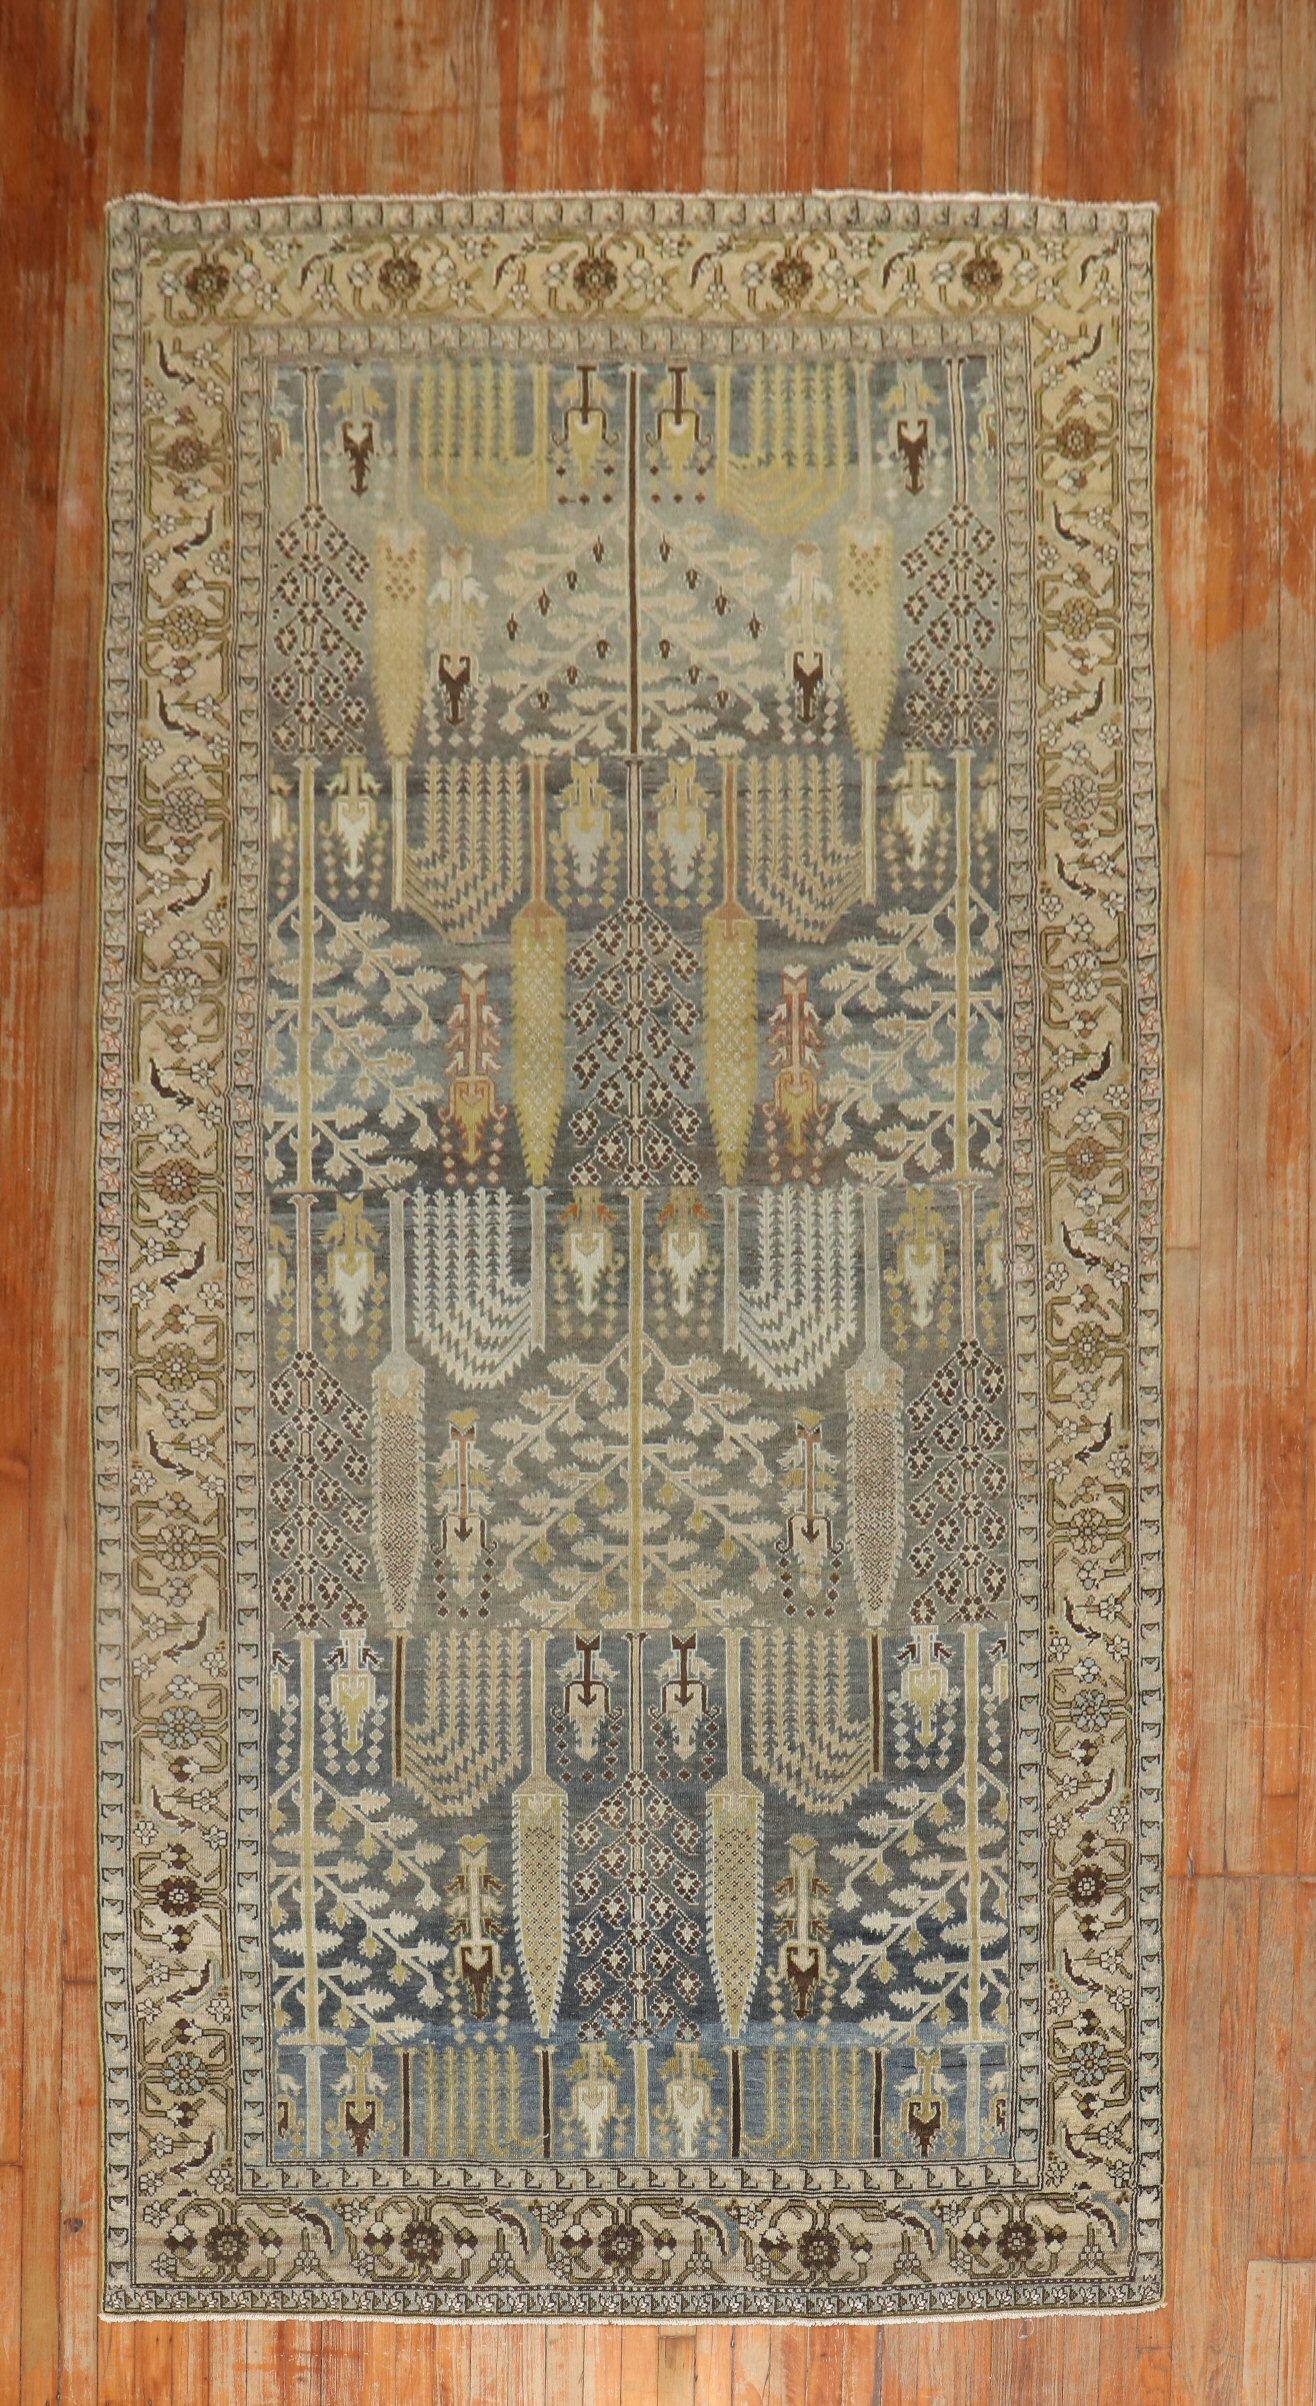 An early 20th century tribal highly decorative Persian Malayer gallery-size runner with a willow tree pattern on a striated gray ground. Great quality and in great condition. 

Measures: 5'5